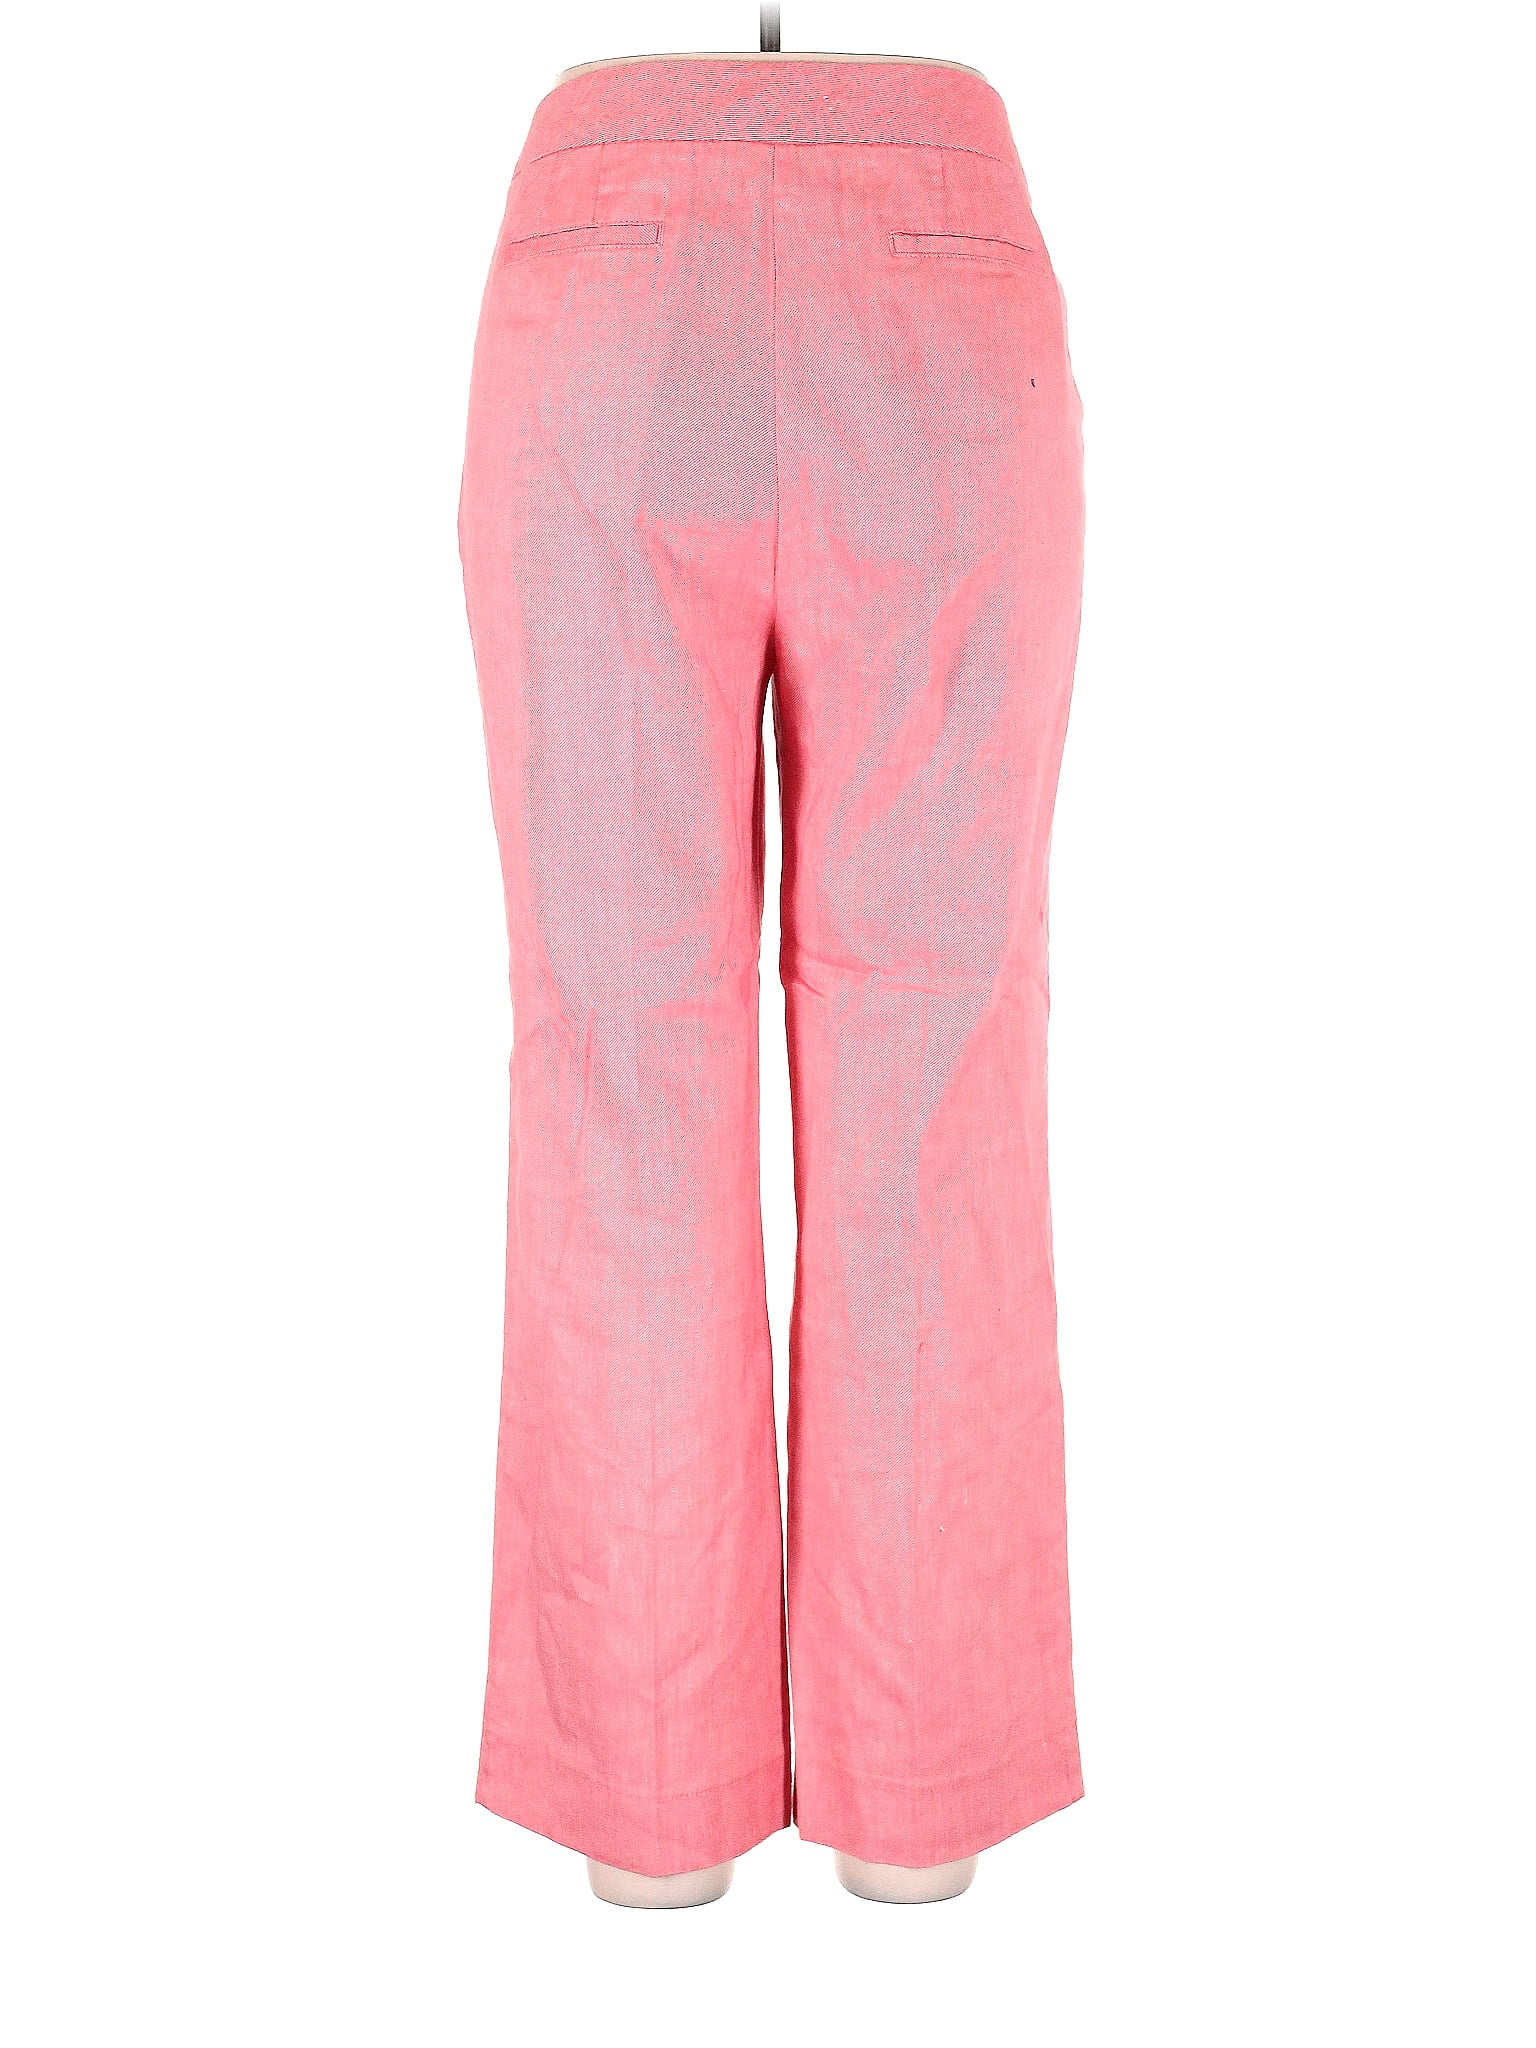 Soft Surroundings Pink Casual Pants Size S (Petite) - 73% off